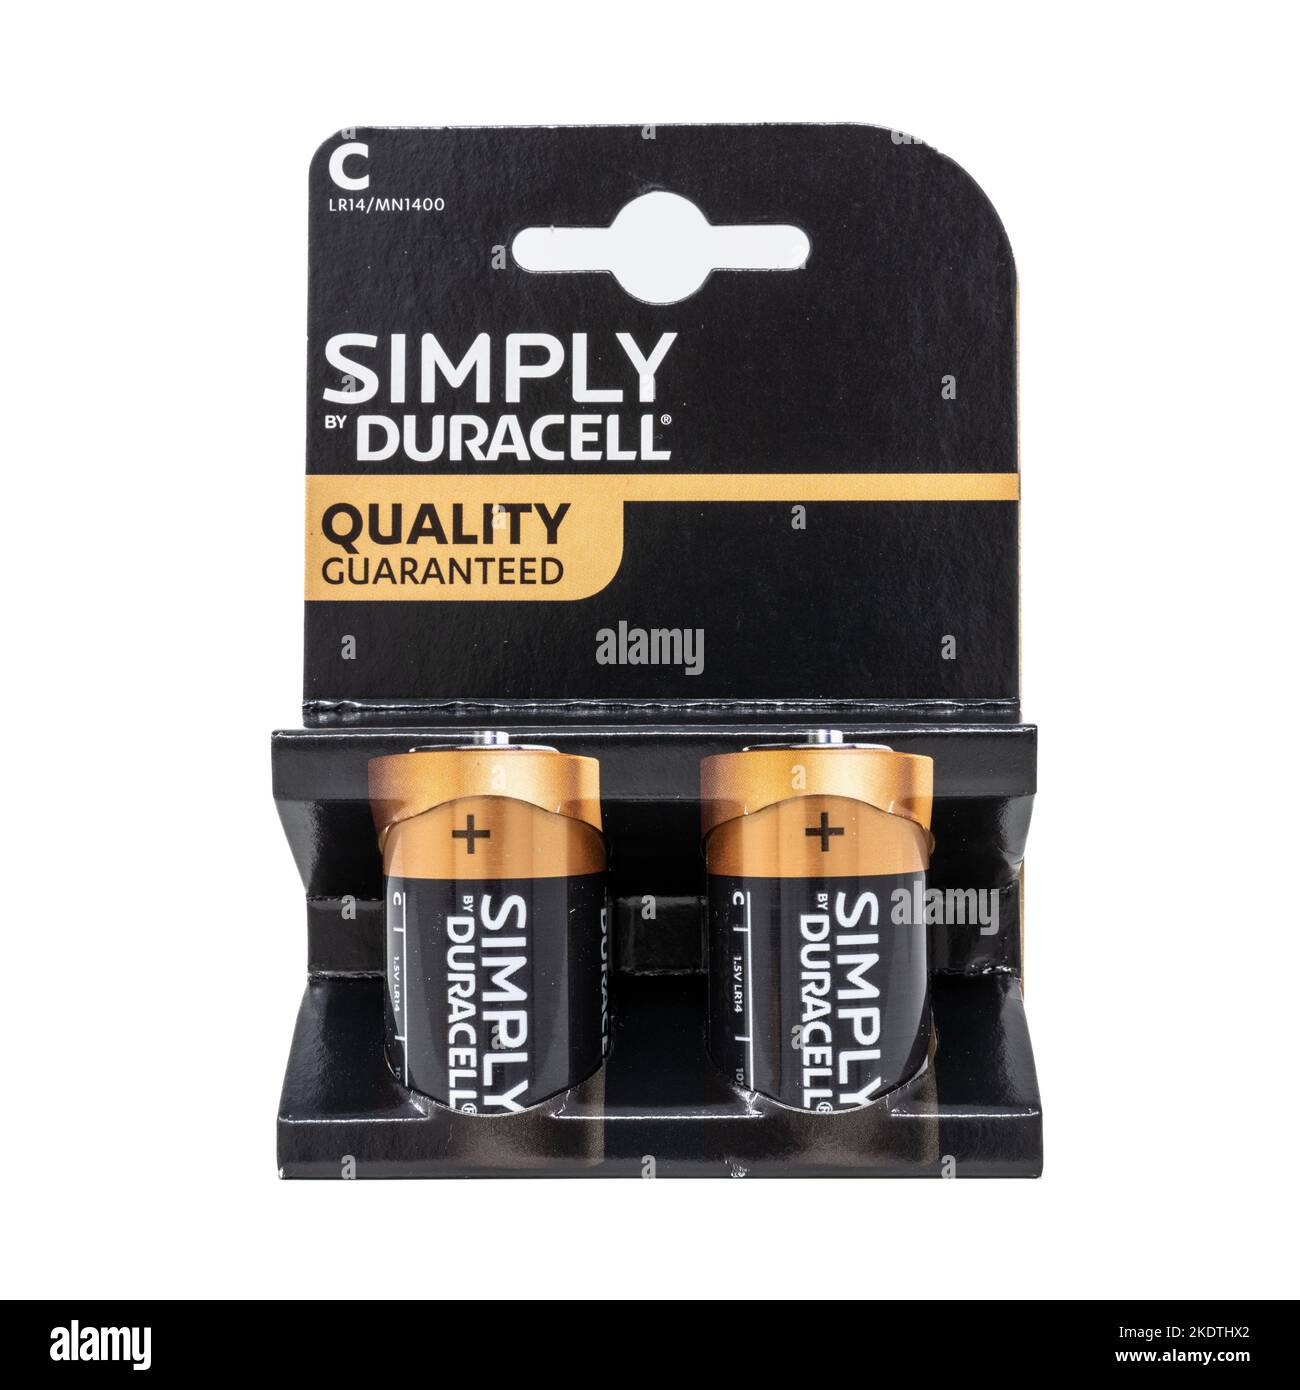 Duracell Simply C Alkaline 2 pack Batteries Stock Photo